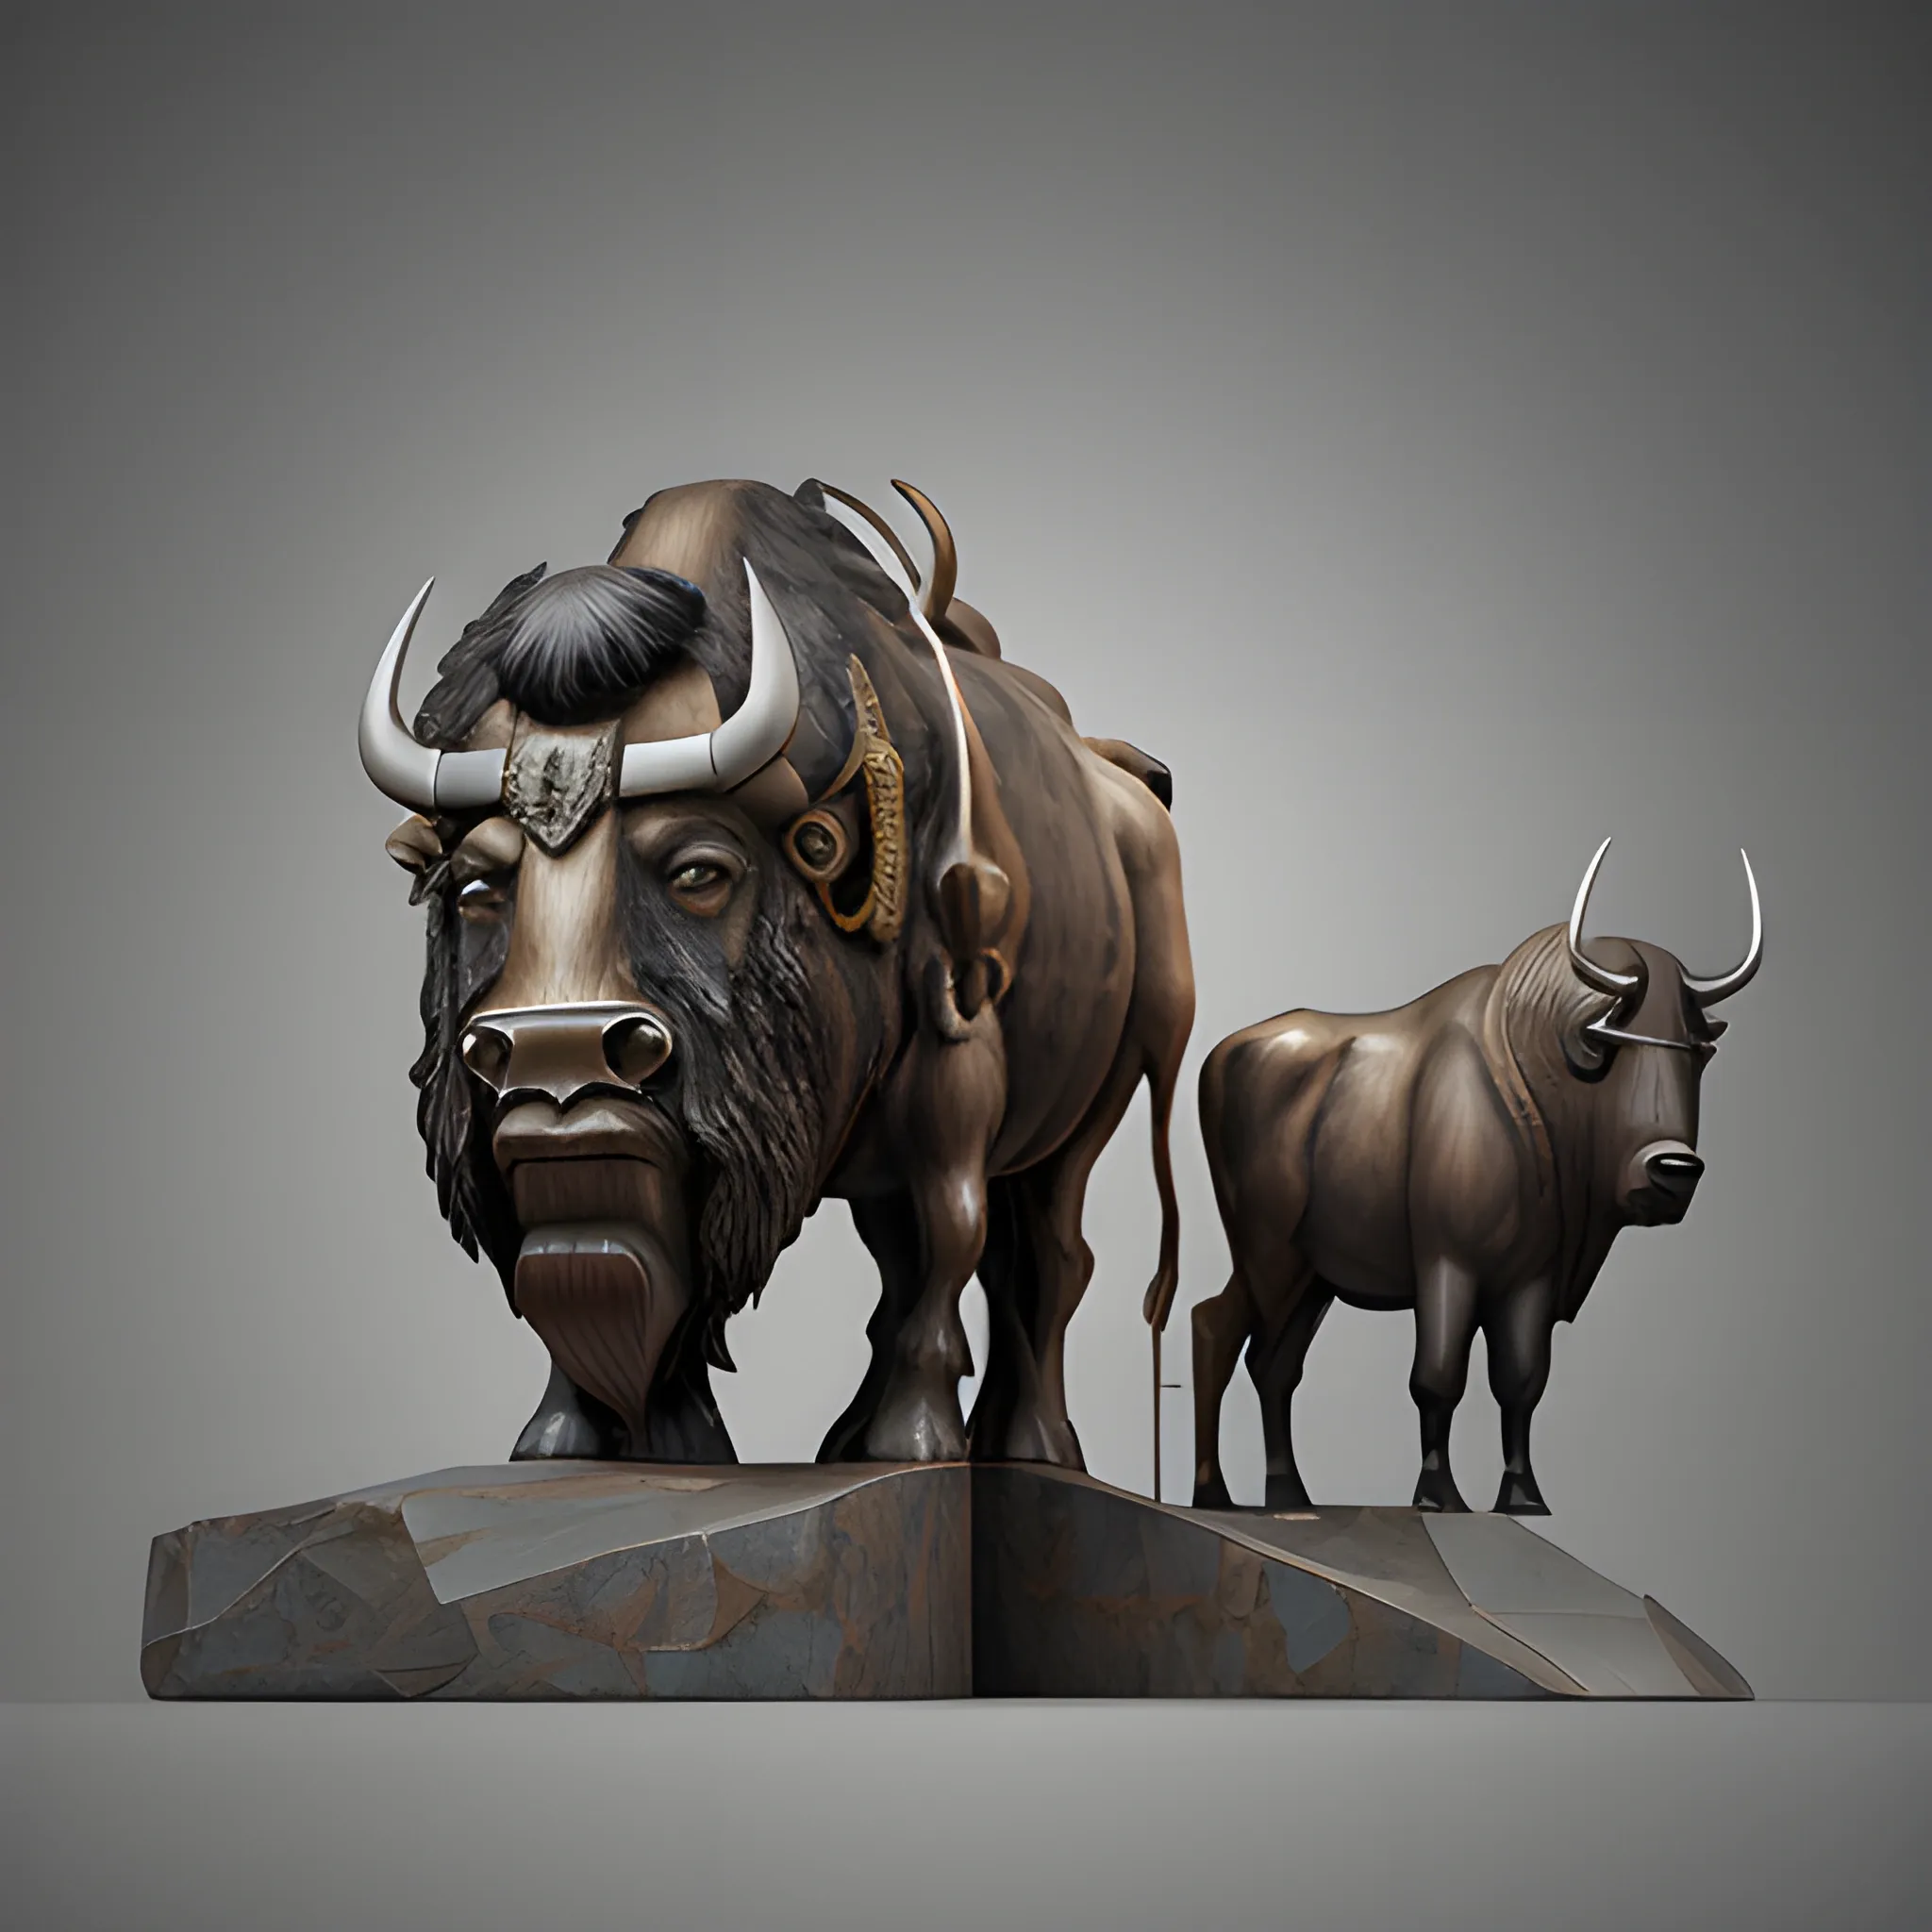 sculptural set in Brancusi style , Big metalical Bison featured native american hunters, gear and riveted steel,  digital matte realistic surface, illustration sharp focus, elegant intricate digital painting abstract concept art global illumination ray tracing advanced technology, simple composition, elegant shapes, glam finish

